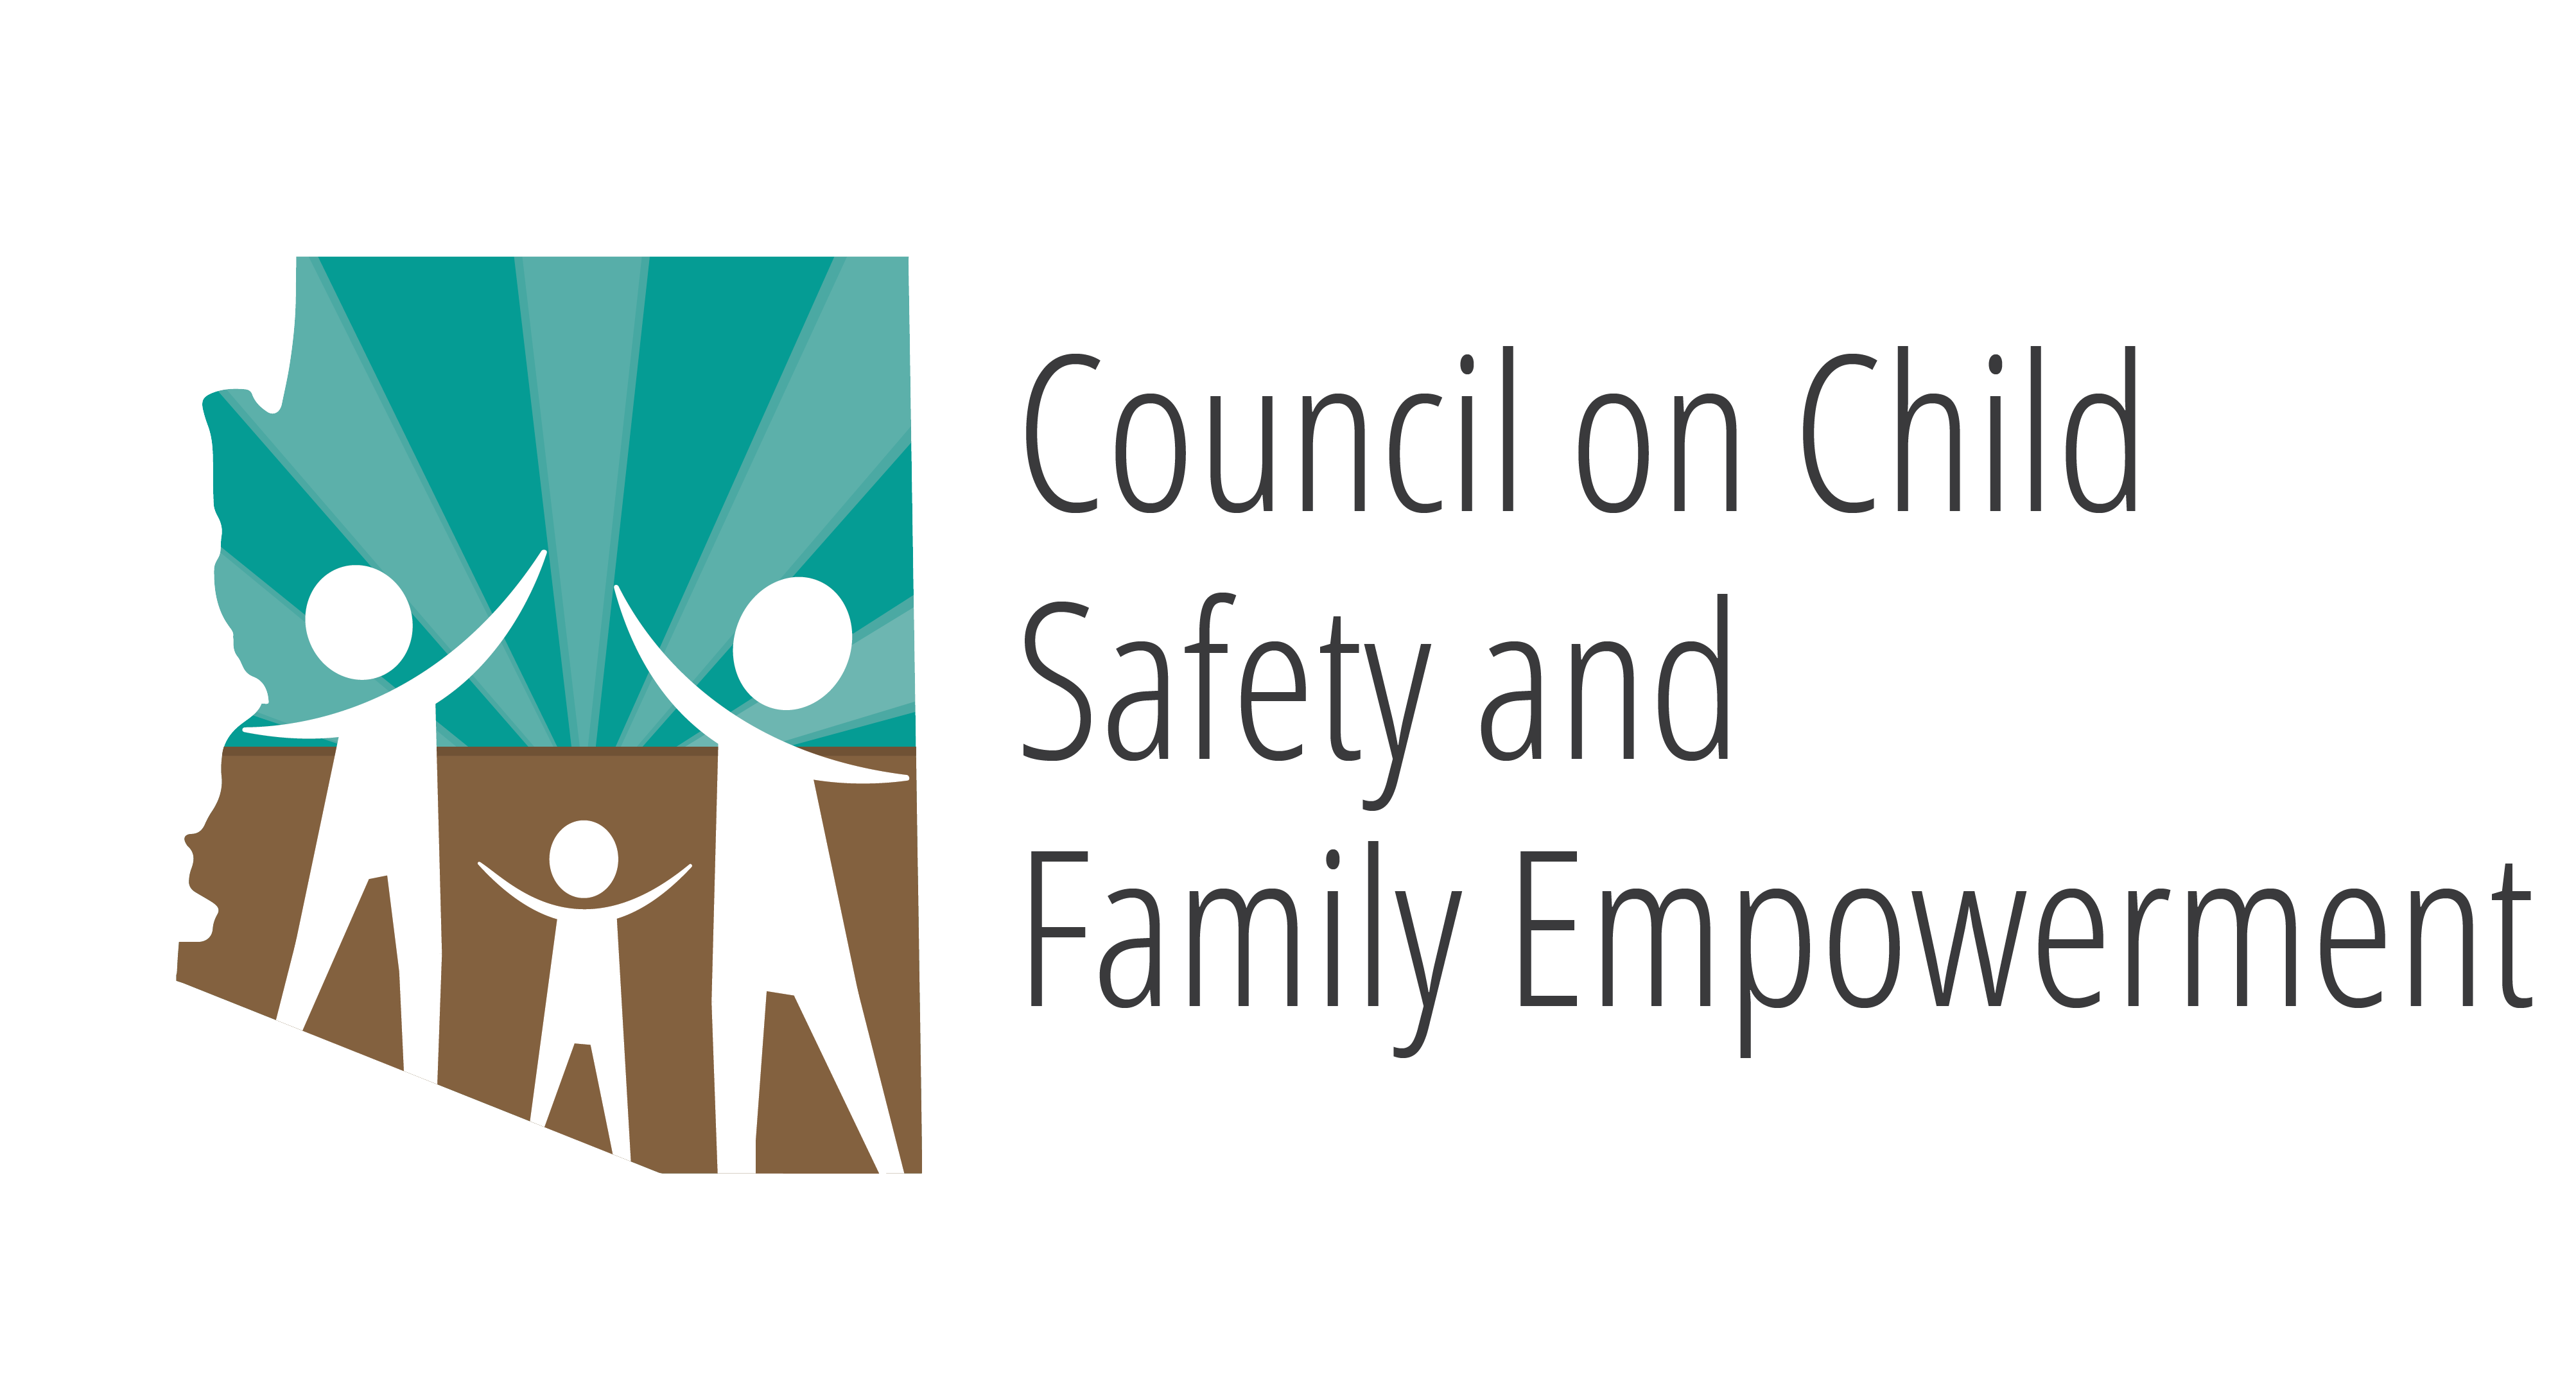 Council on Child Safety and Family Empowerment logo